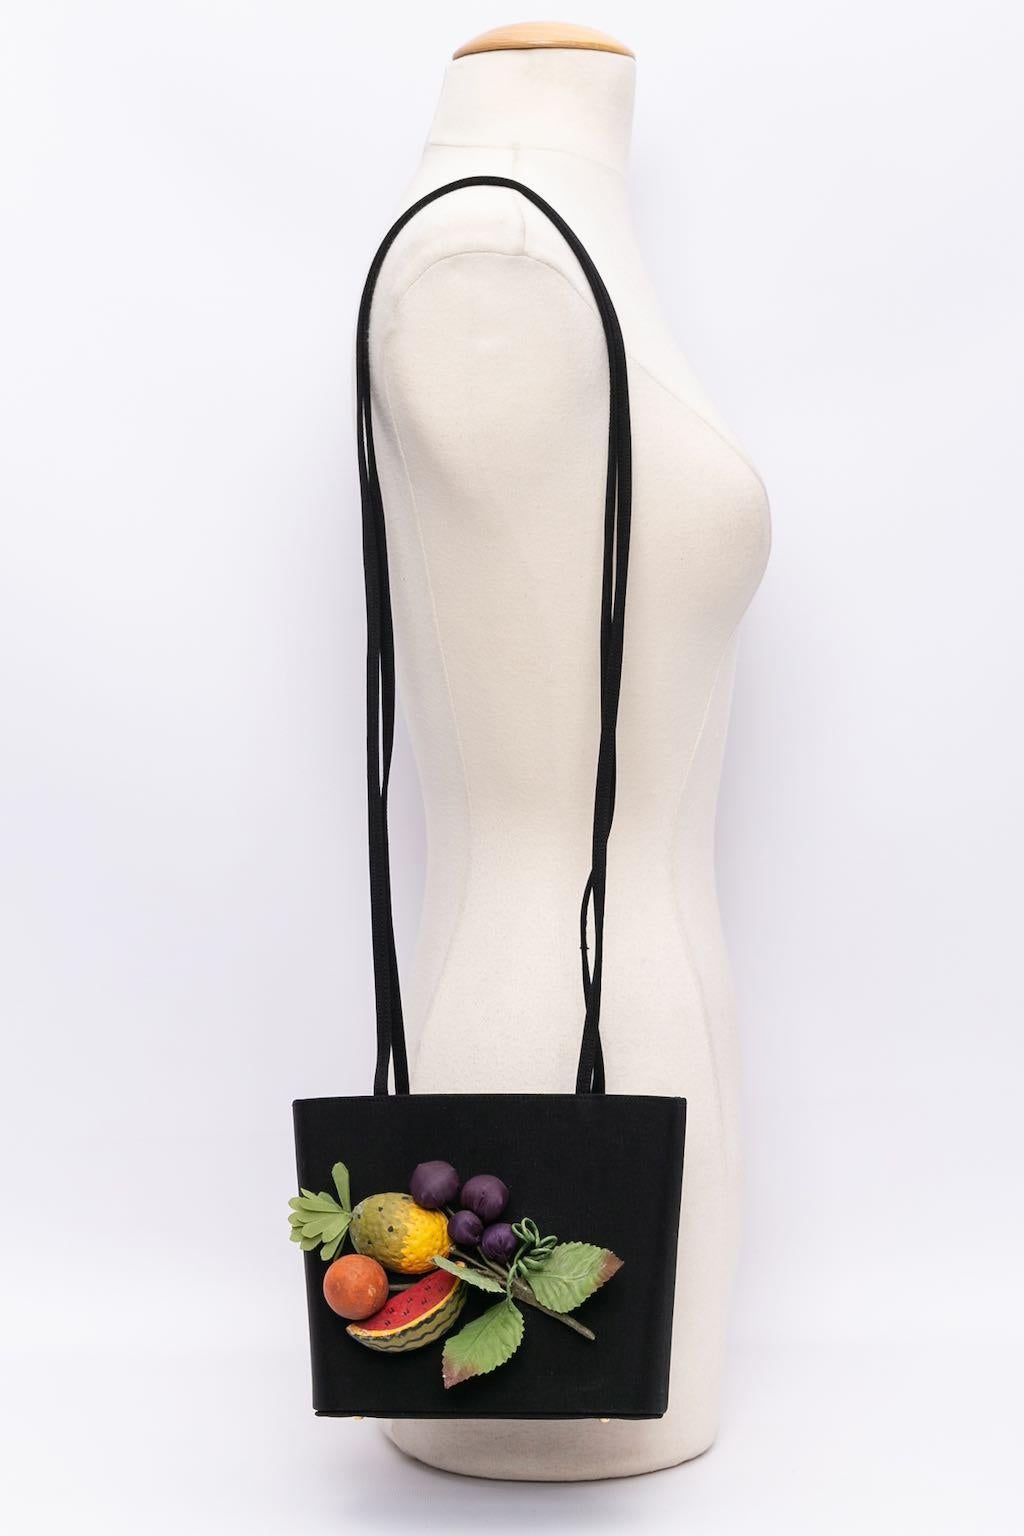 Andrea Pfister Fruits Bag in Black Fabric 6